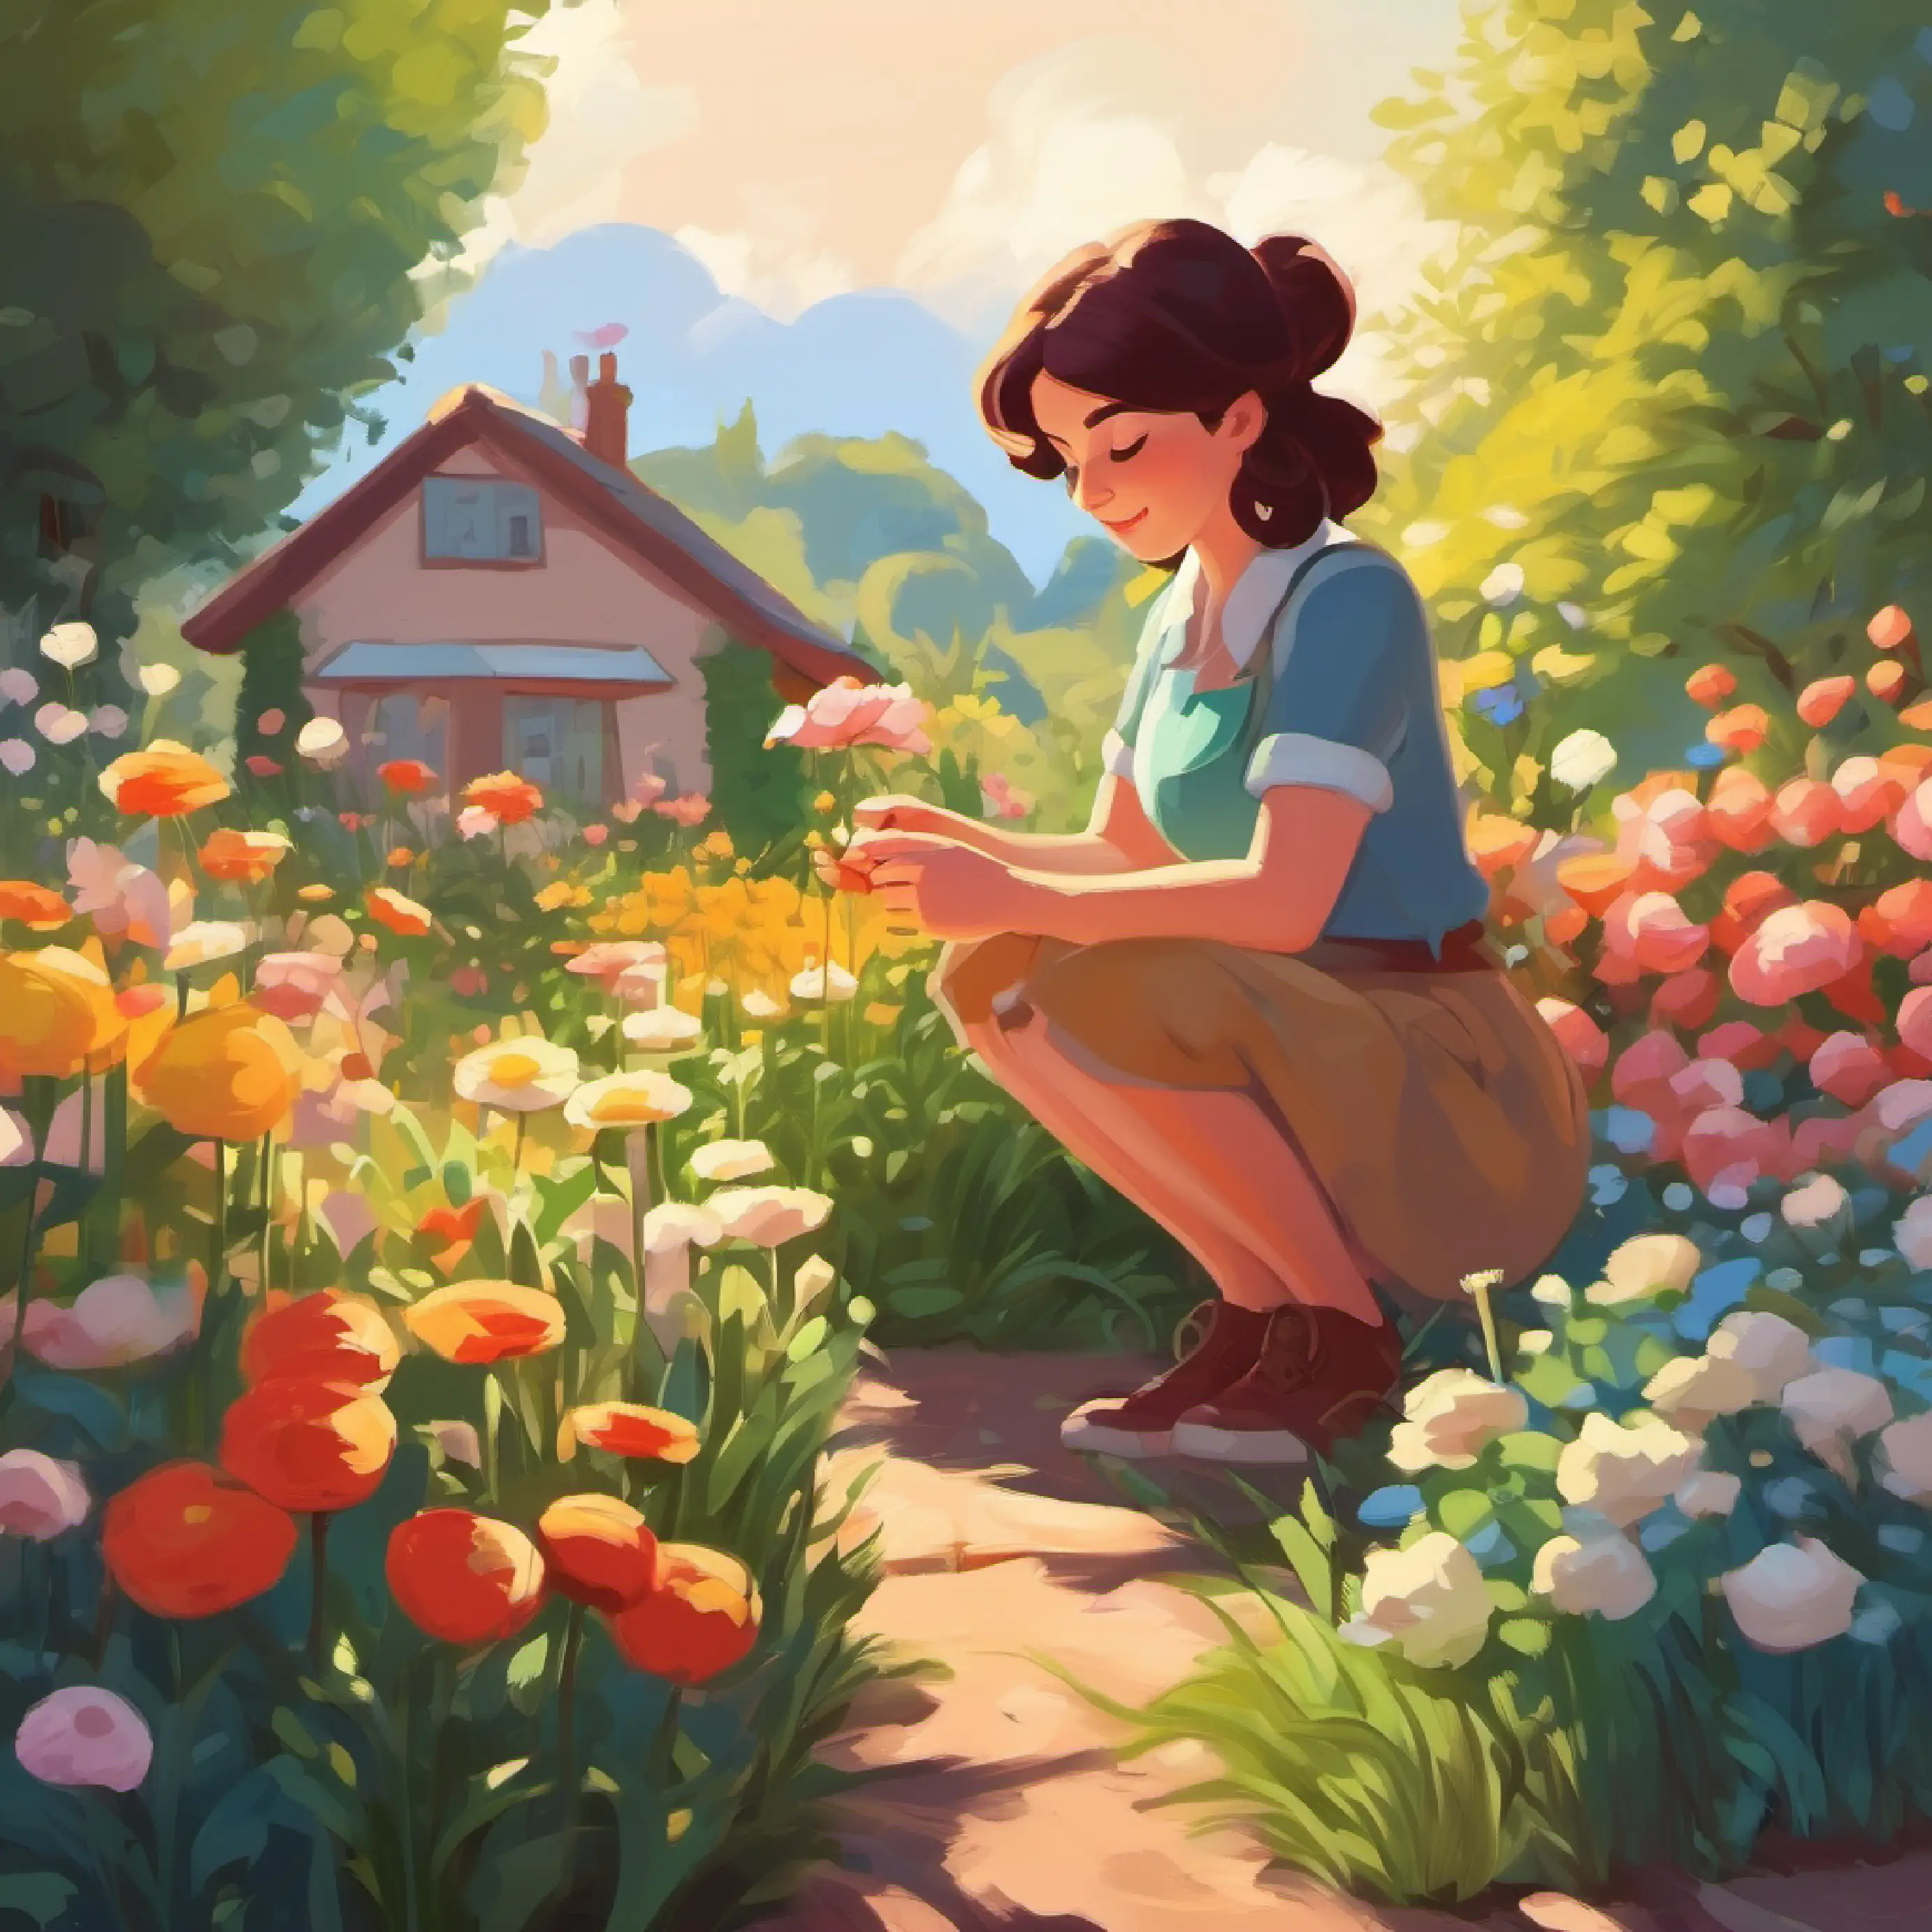 Amy counts flowers in her garden on a sunny morning.